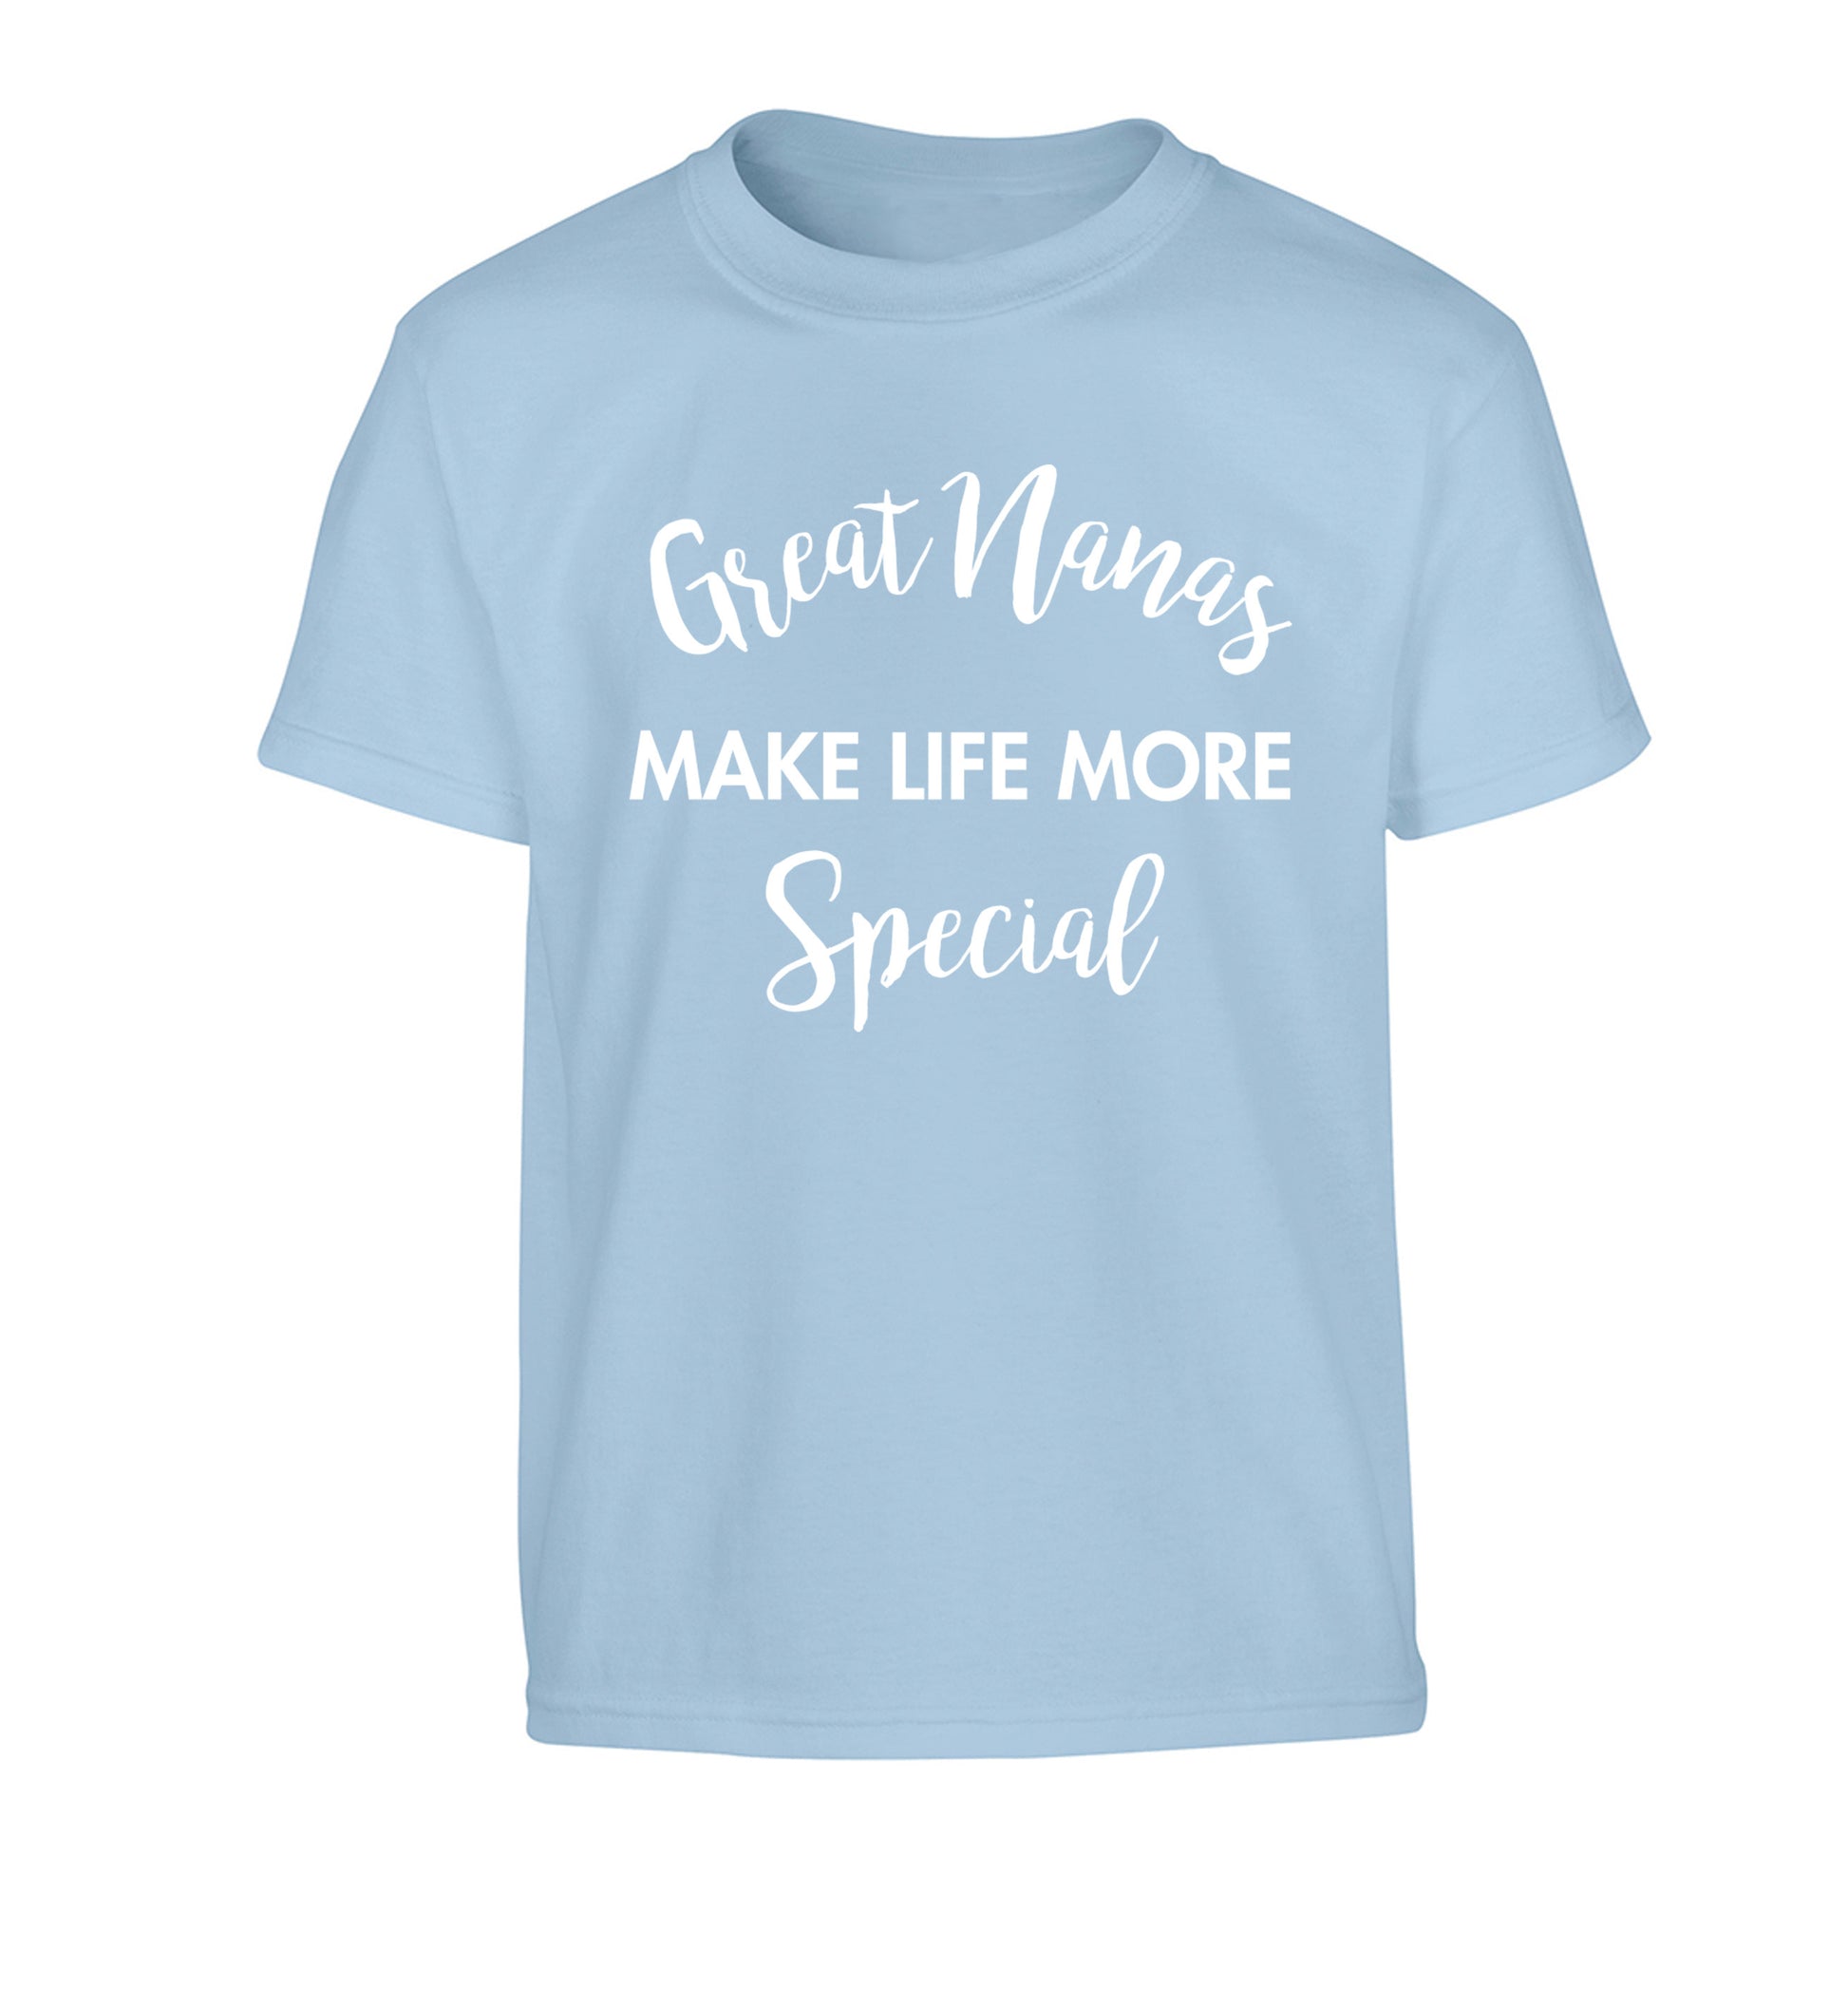 Great nanas make life more special Children's light blue Tshirt 12-14 Years